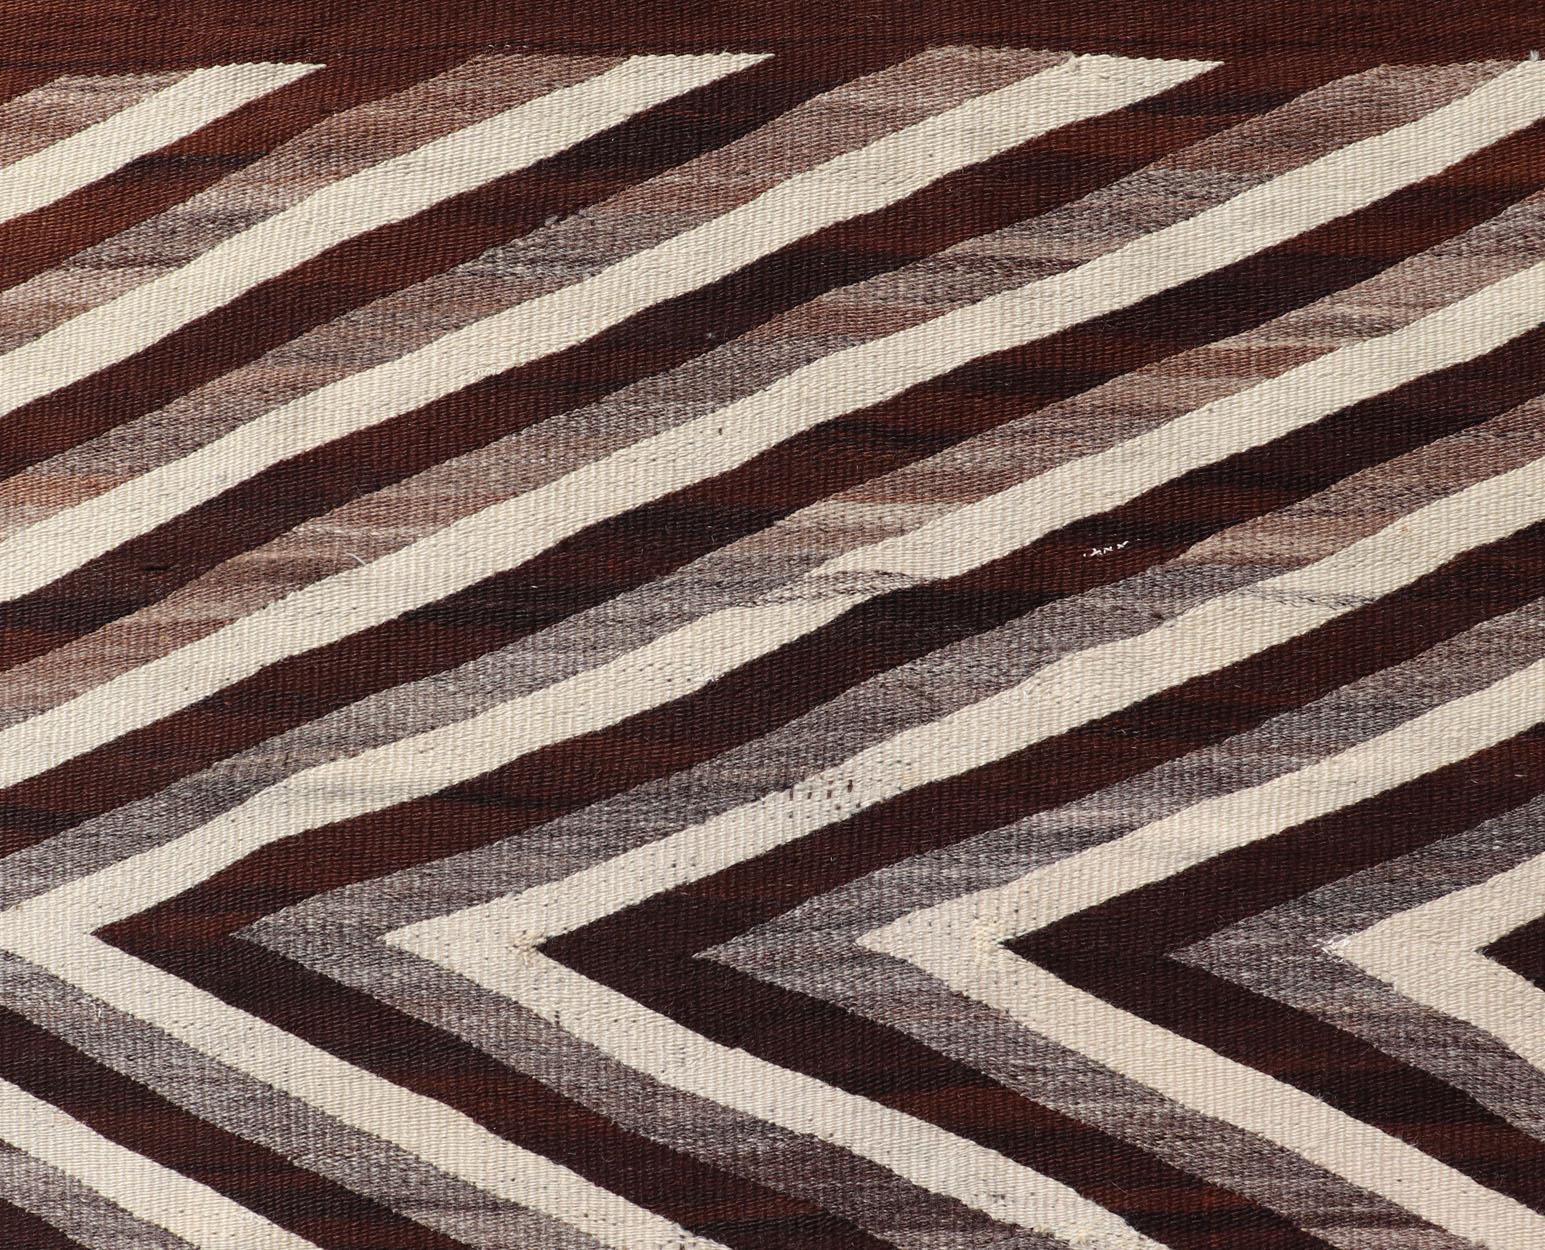 American Large Early Navajo Tribal Rug with Large Zig-Zag Design in Brown, Ivory For Sale